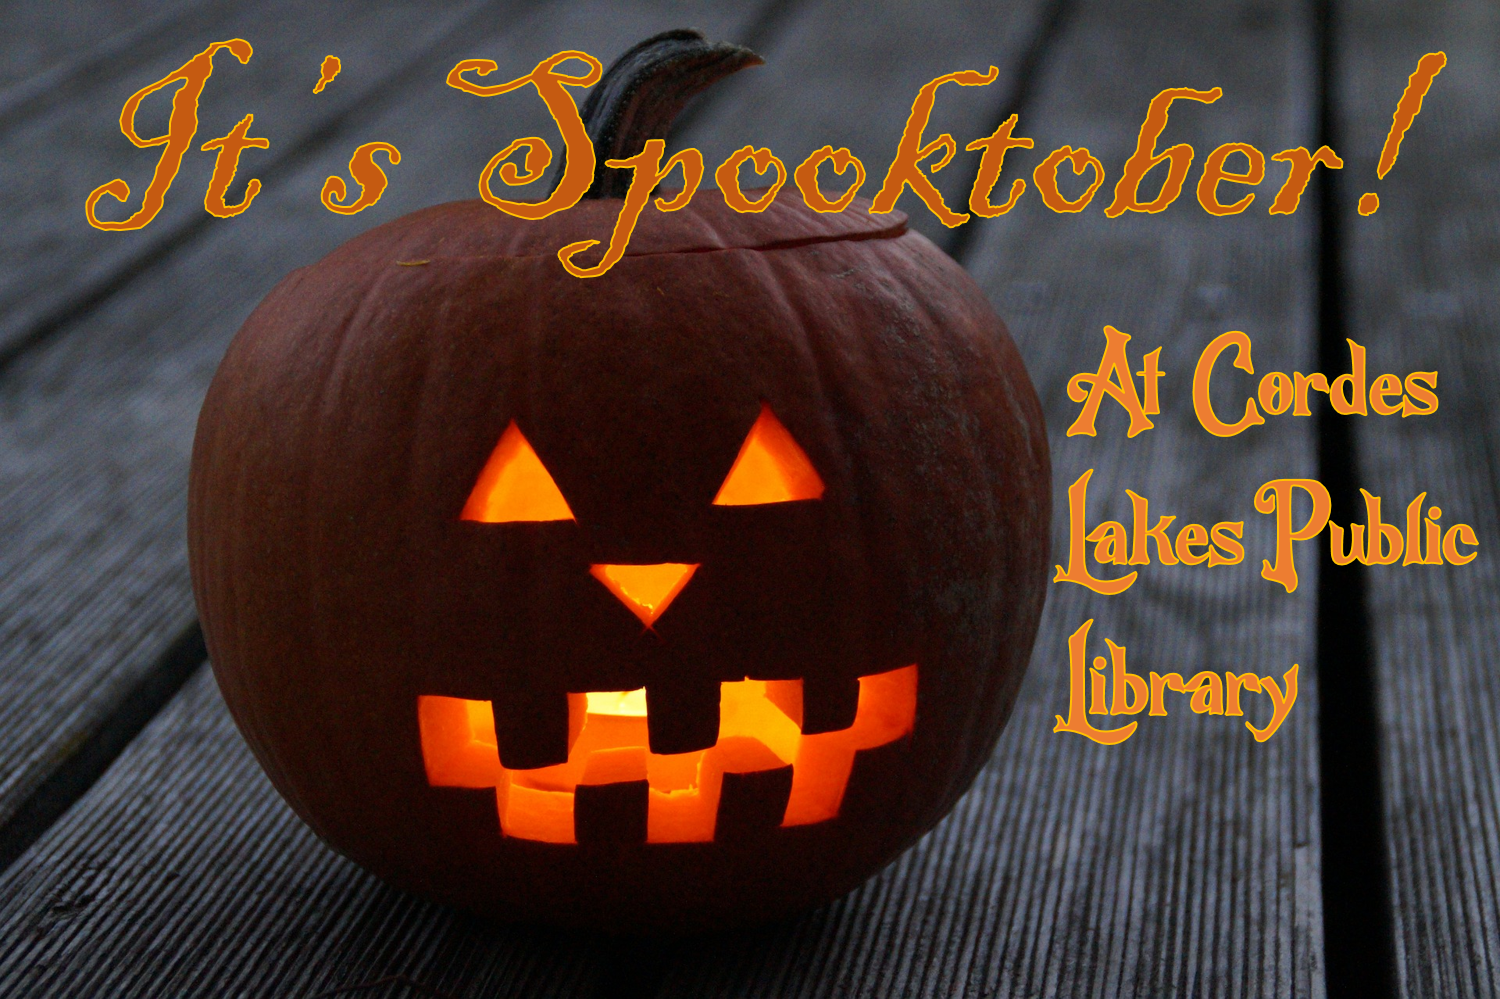 A happy jack o' lantern and the text "It's Spooktober! At Cordes Lakes Public Library".